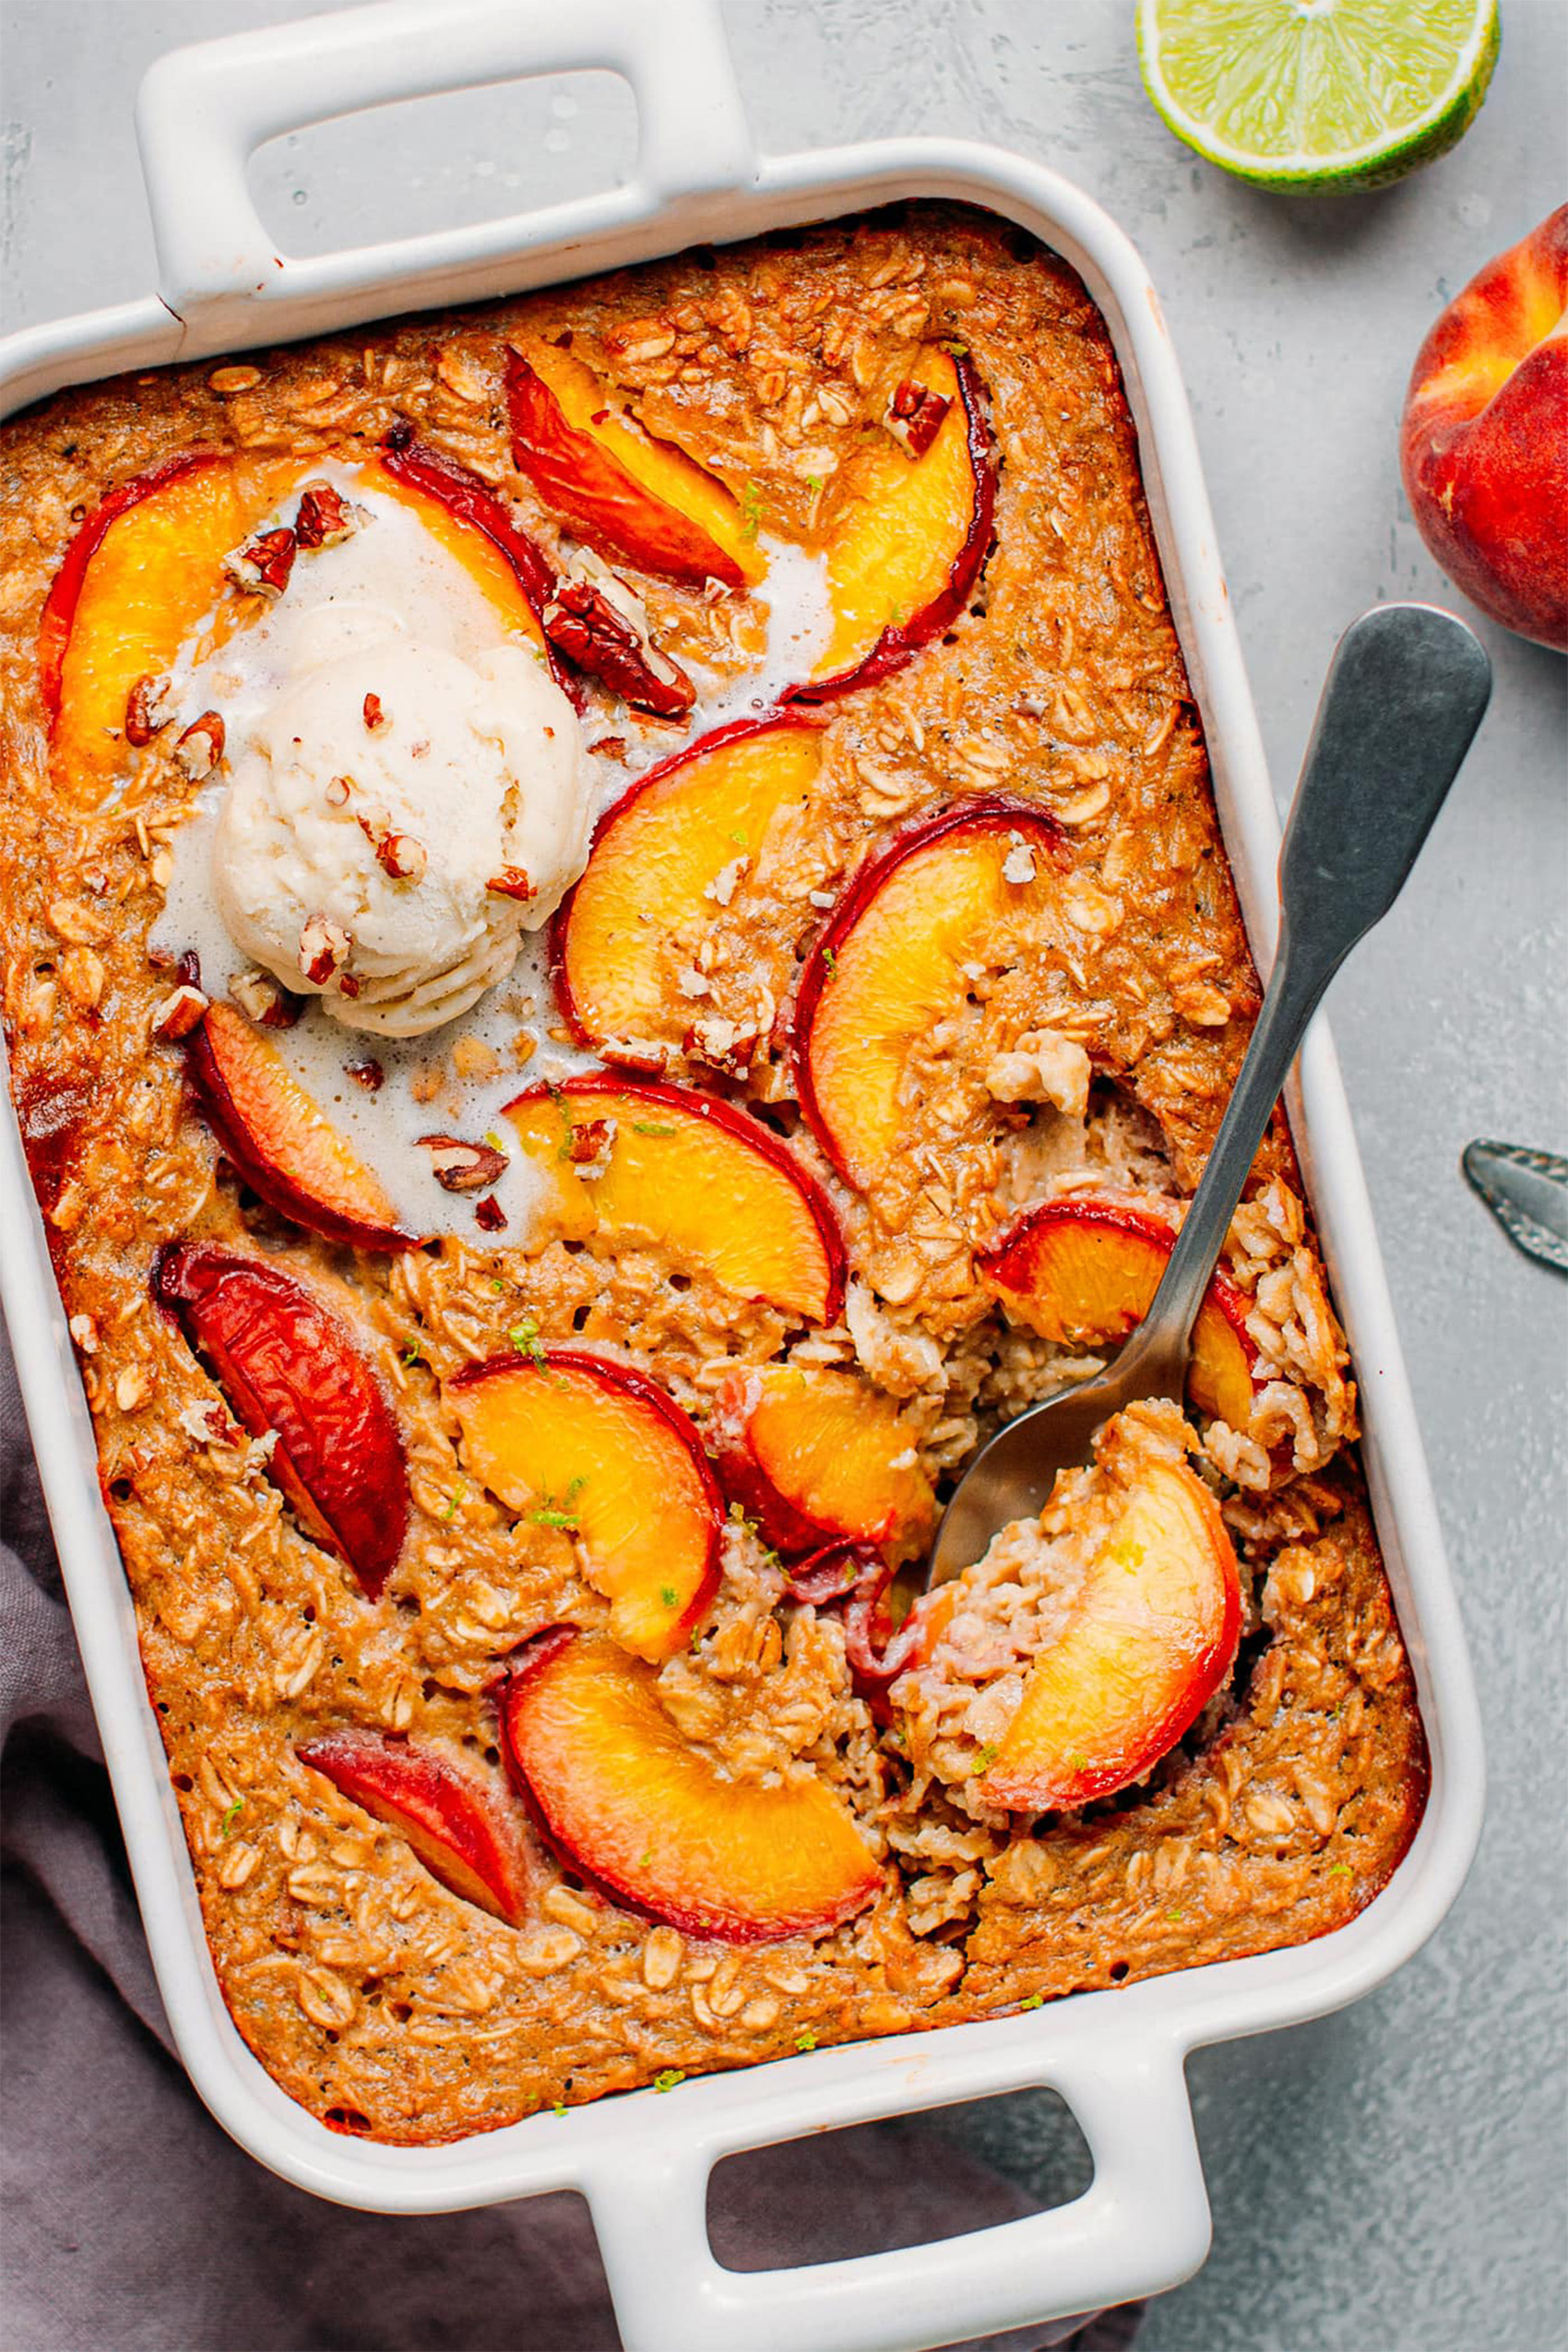 a spoon taking a scoop out of a dish of peach baked oats